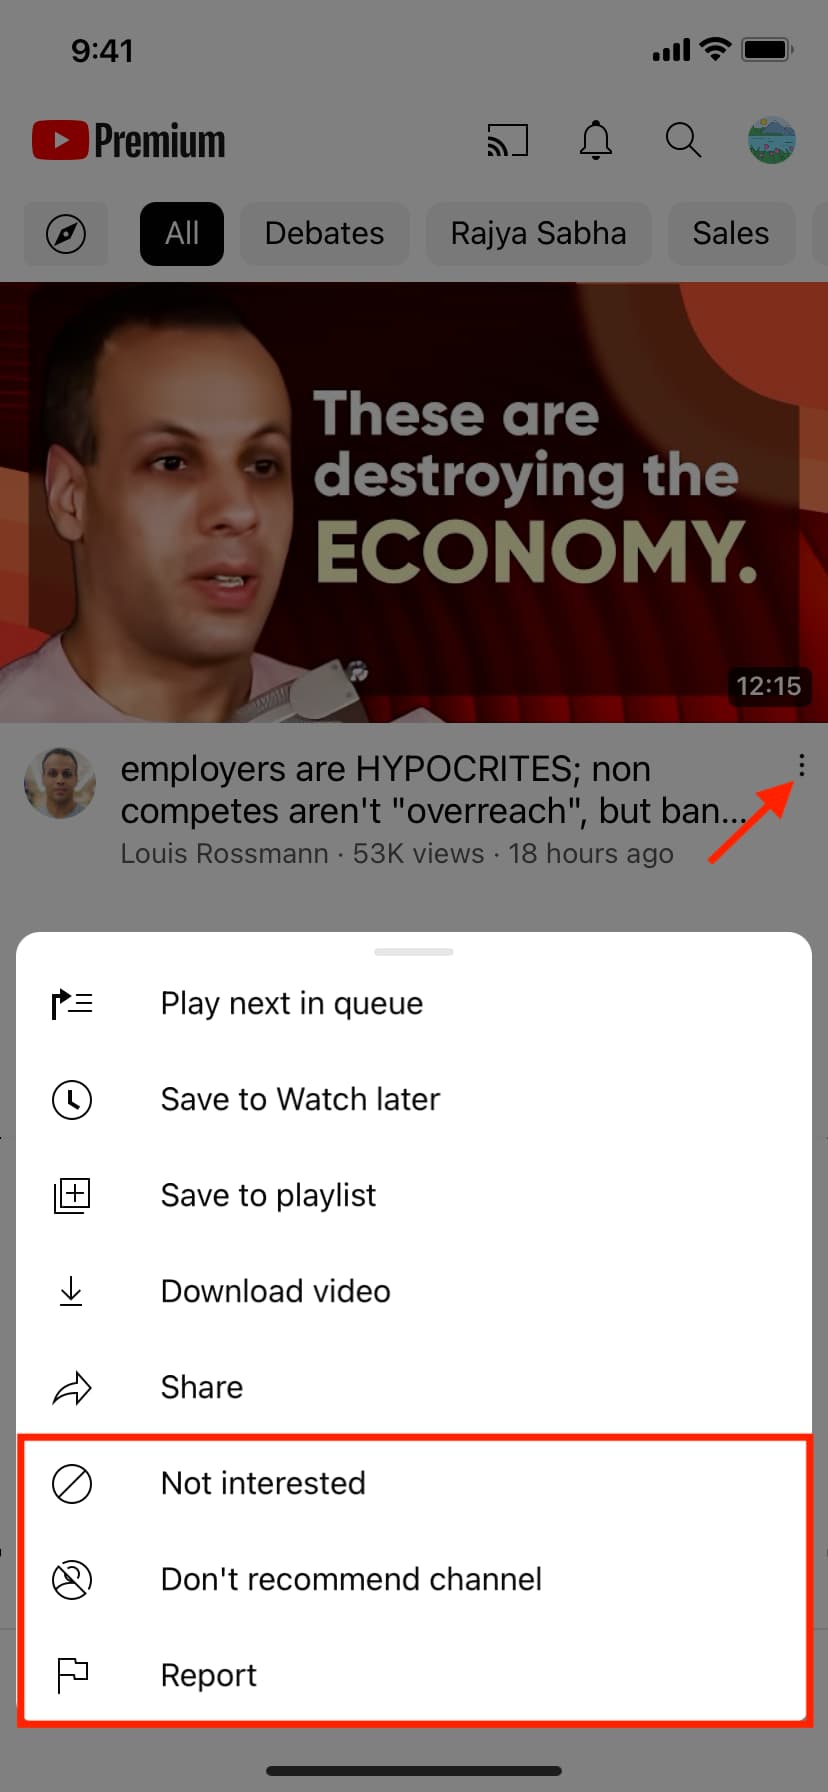 Not interested and Don't recommend channel in YouTube